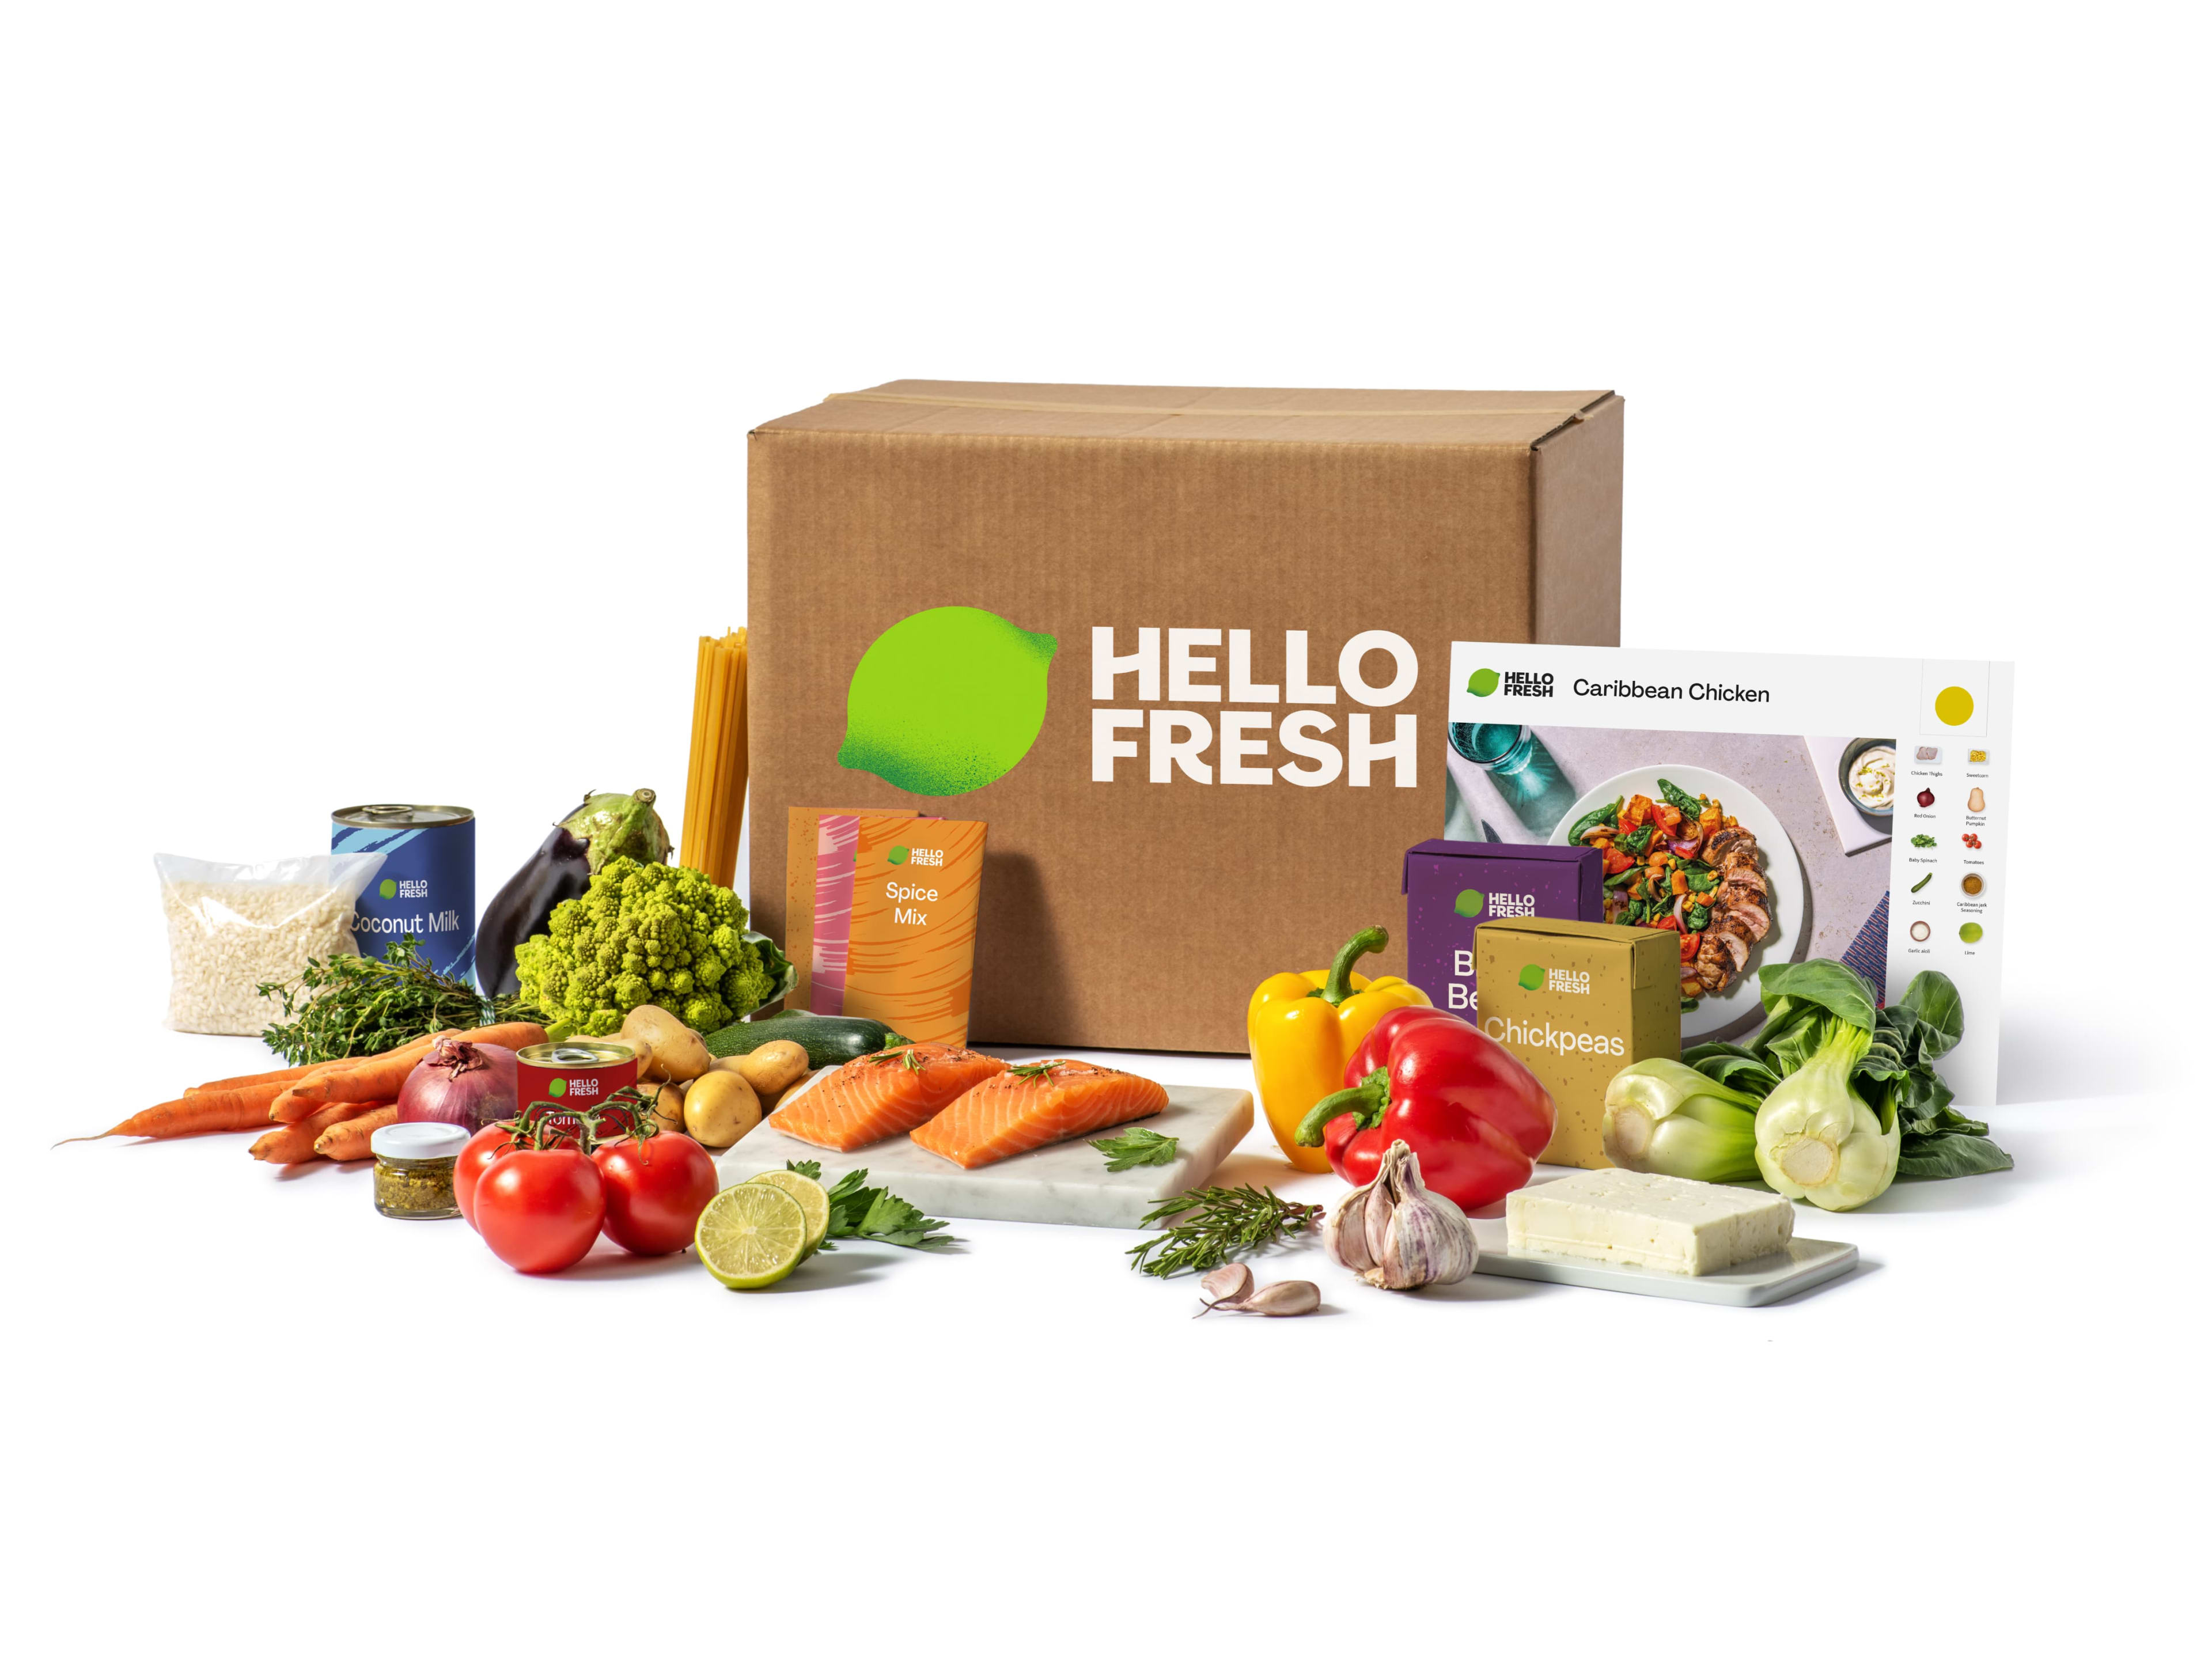 Meet the HelloFresh meal prep delivery service